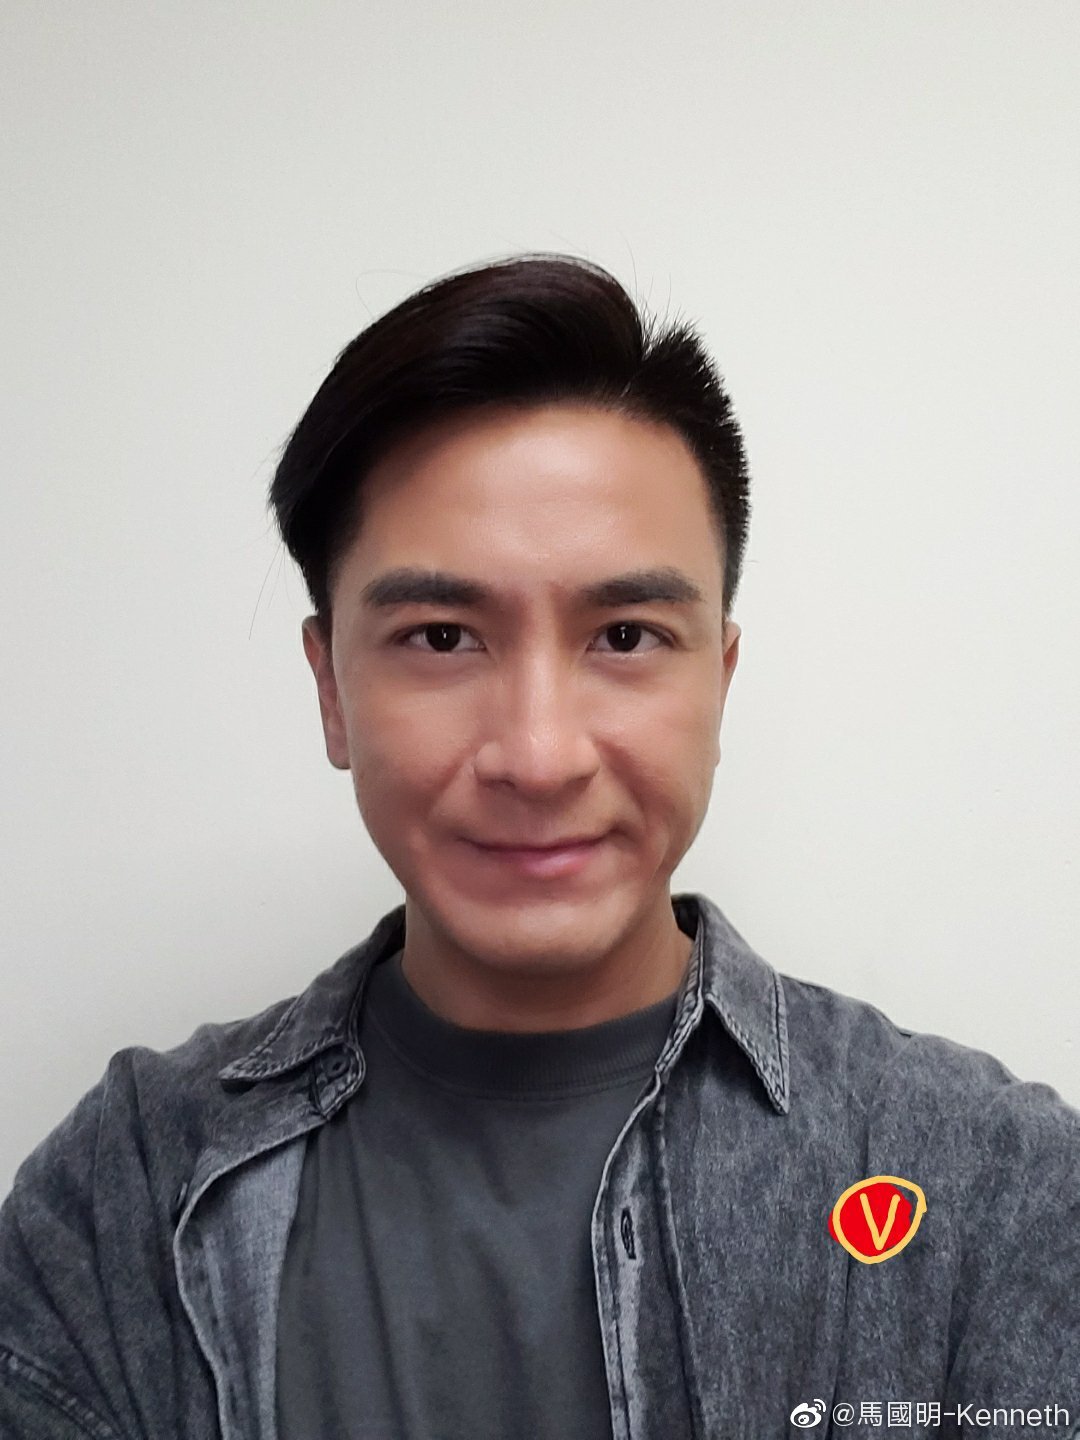 Kenneth Ma Finally Joined Instagram And Is Following One Of His Ex-Girlfriends